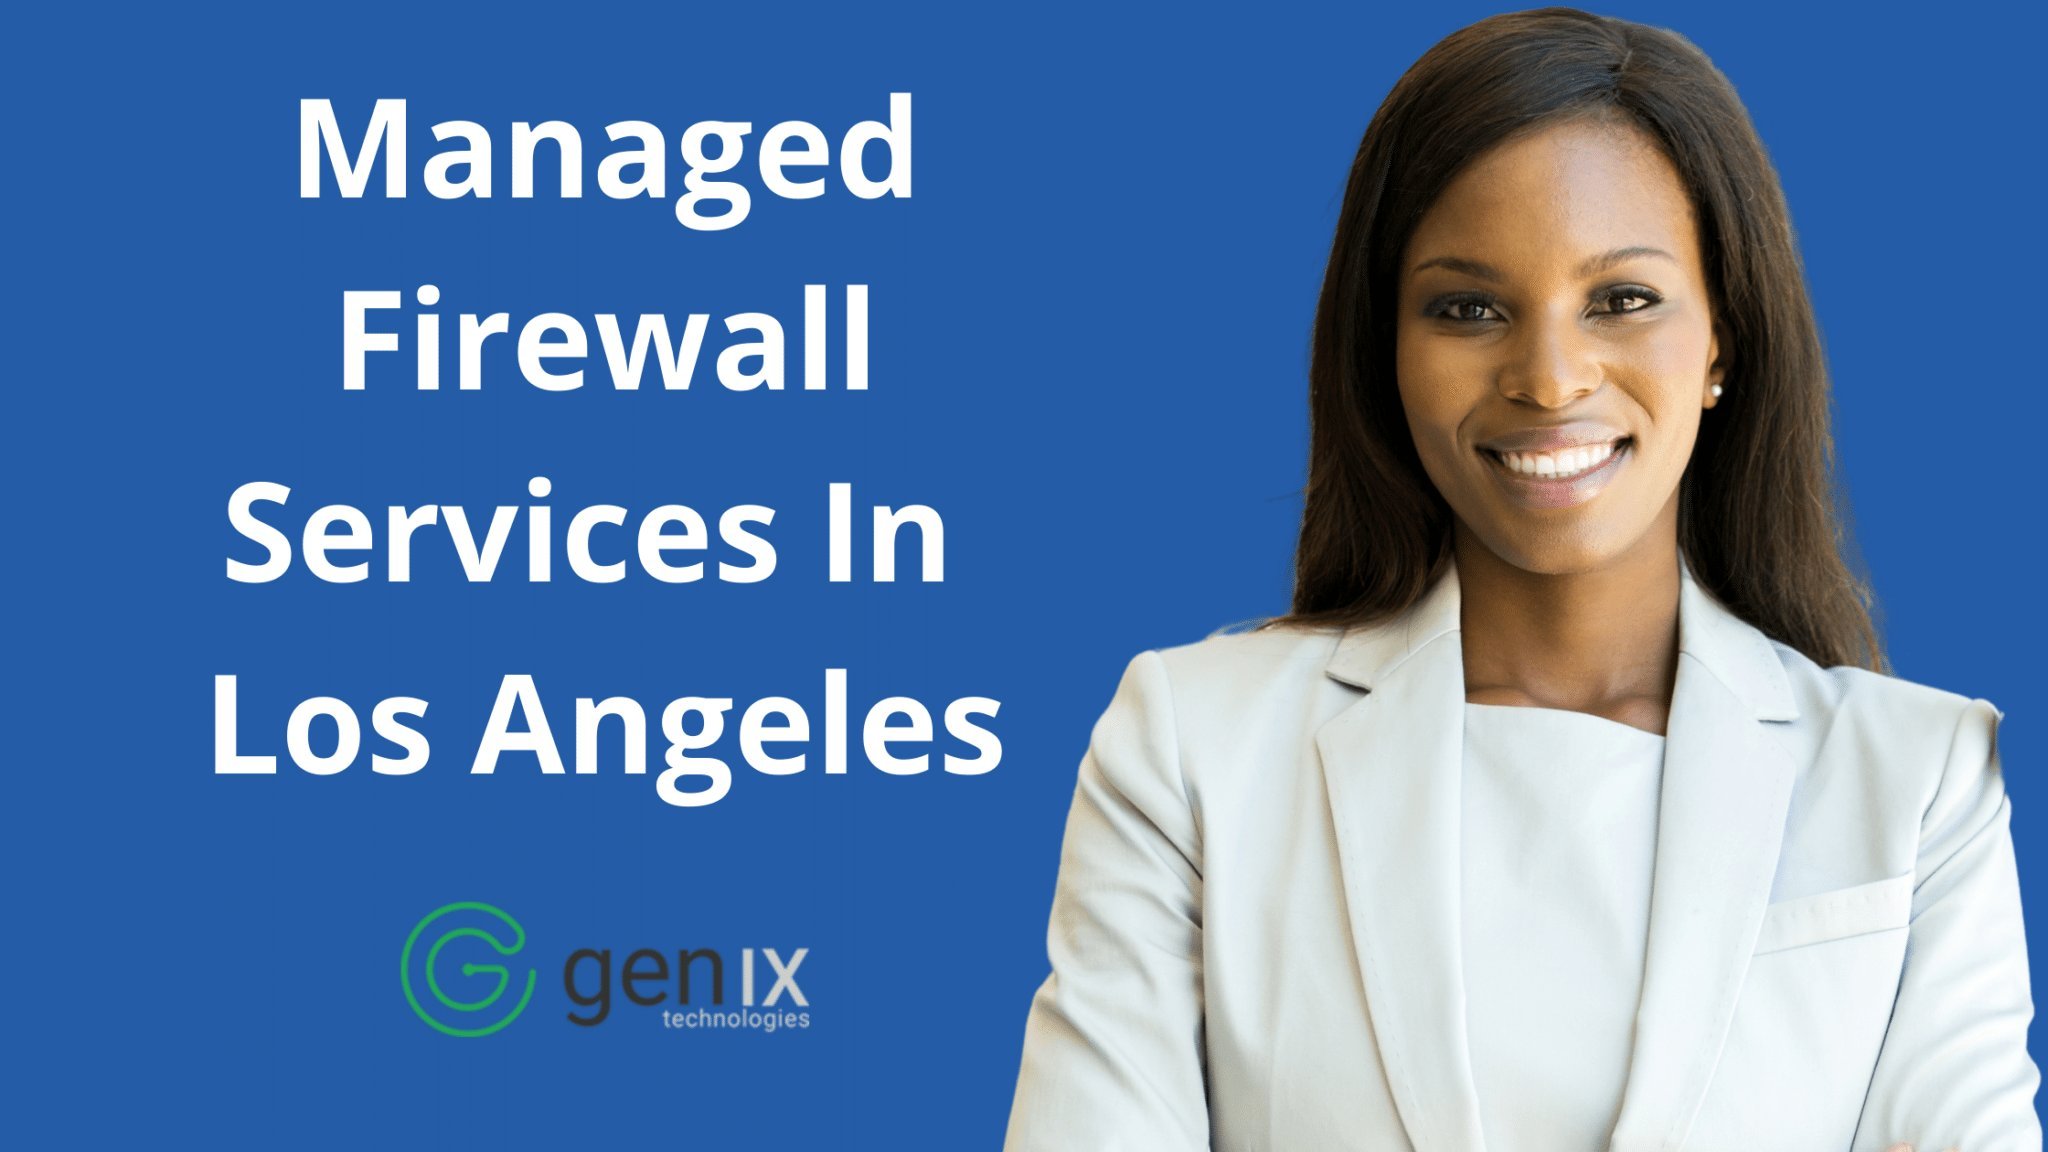 Managed Firewall Services In Los Angeles